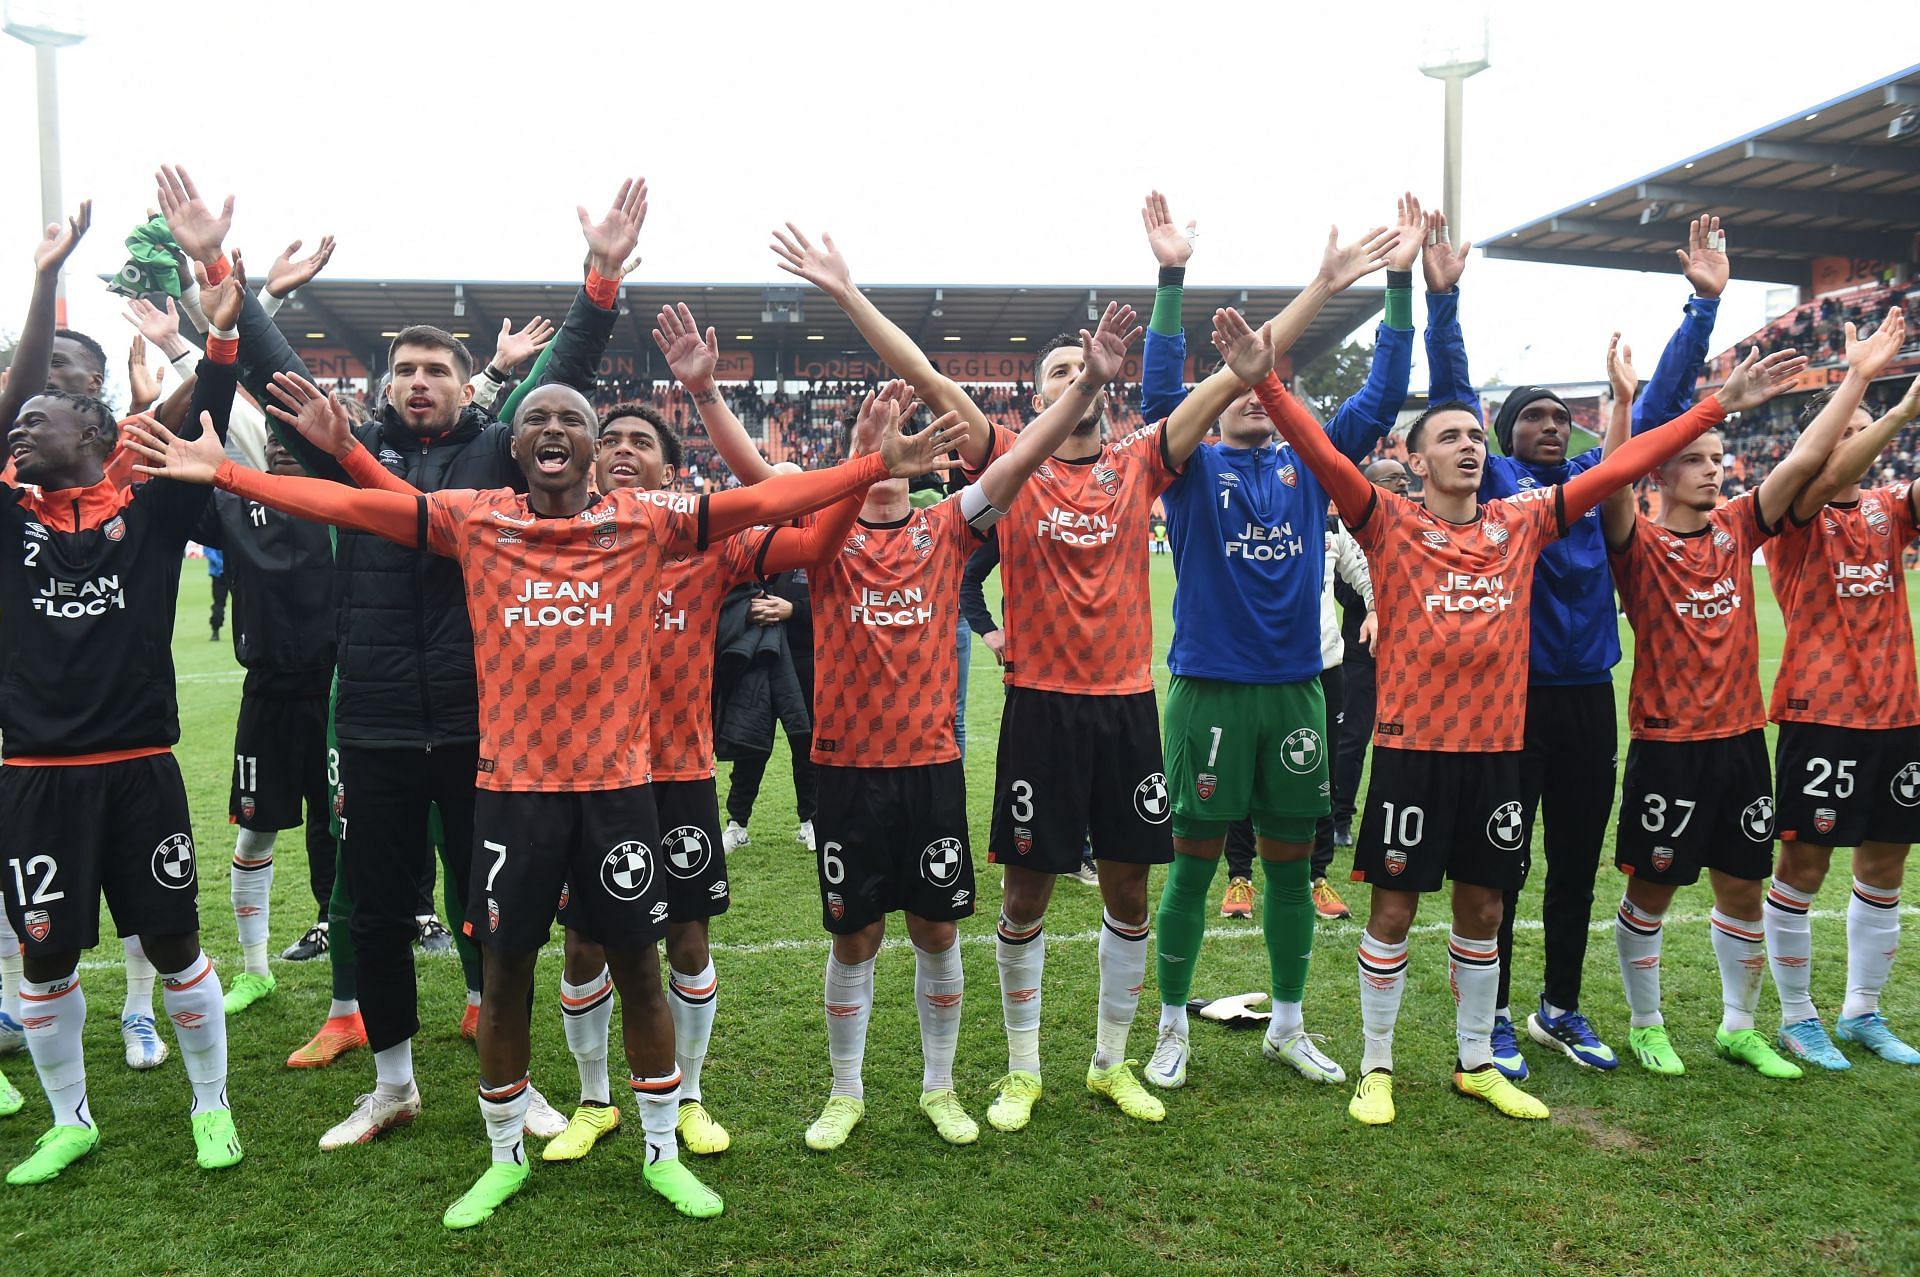 Lorient will face Troyes on Sunday - Ligue 1